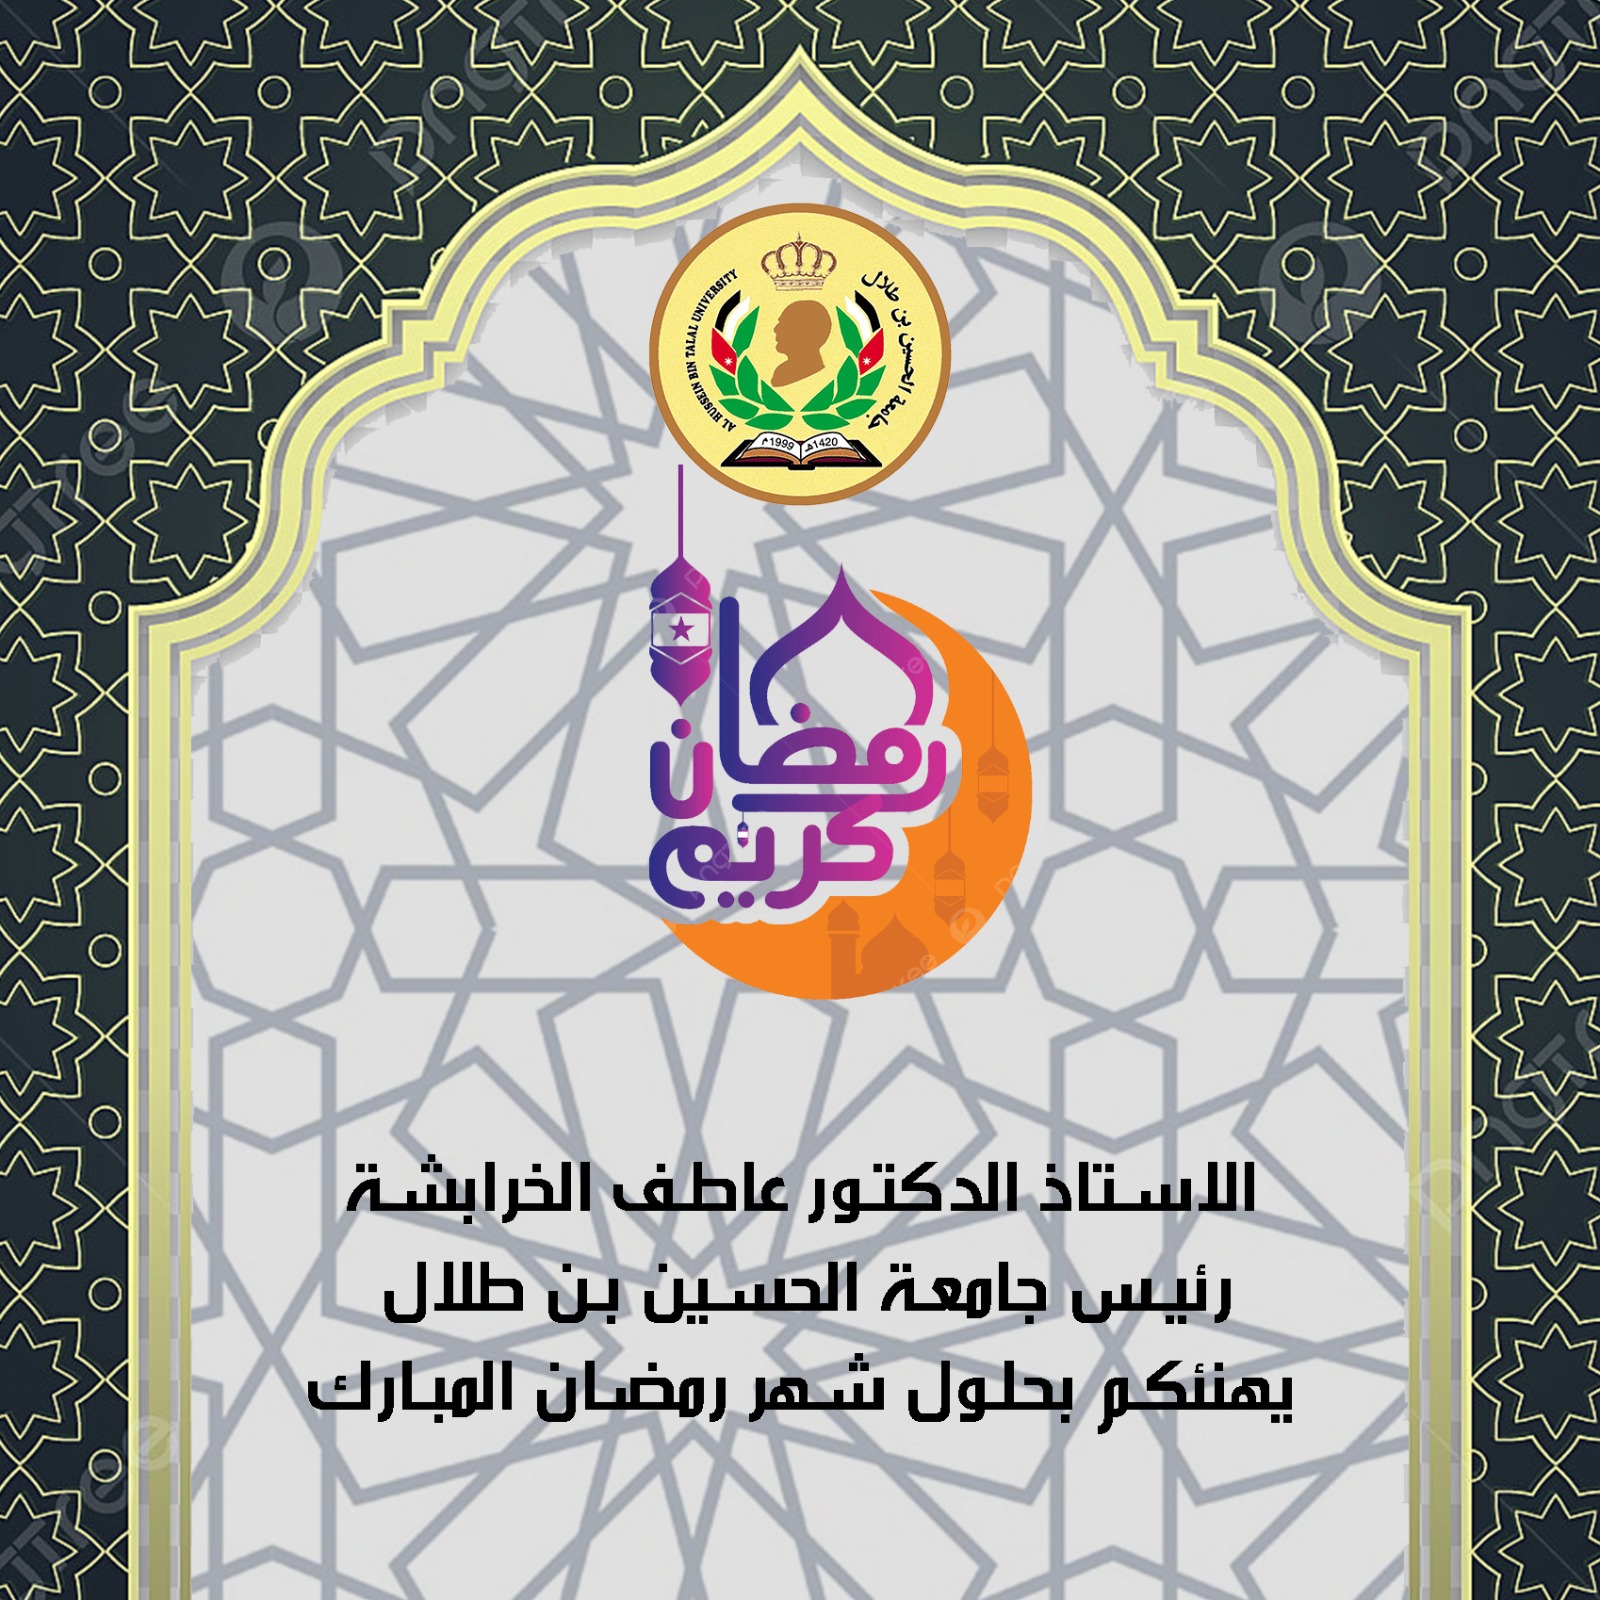 Al Hussein Bin Talal University congratulates His Majesty the King on the occasion of the holy month of Ramadan.